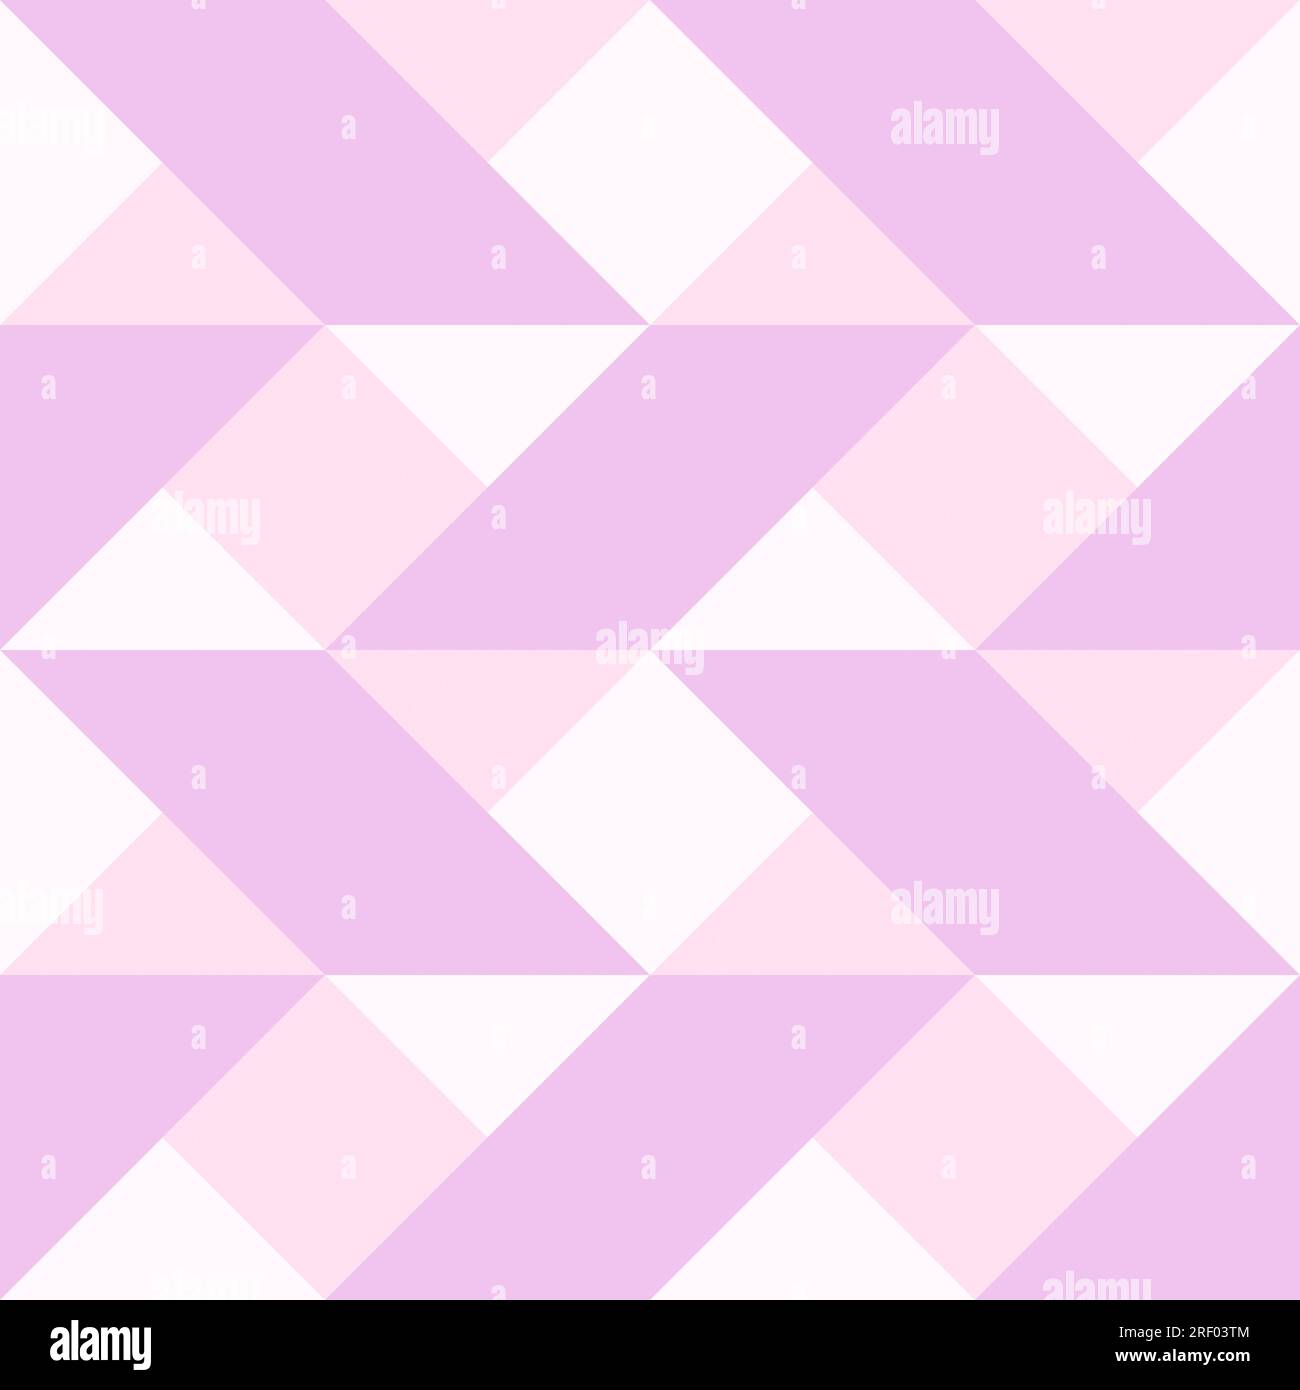 Seamless pattern of bright pink and lilac geometric shapes, abstract minimalistic background. High resolution full frame design template, copy space. Stock Photo